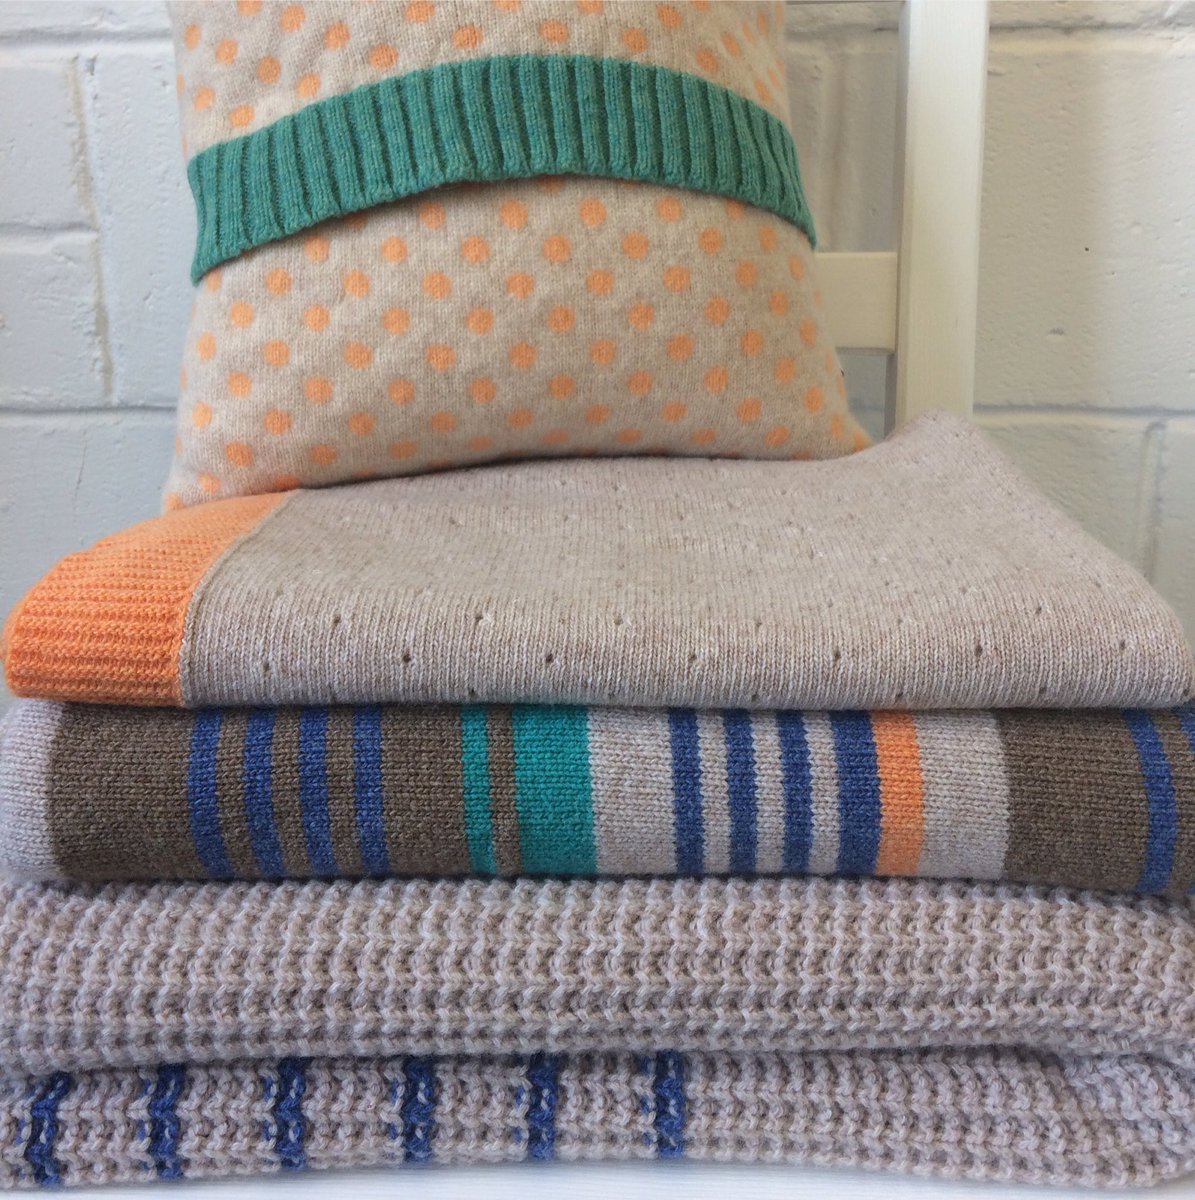 New cushions and blankets online soon! #catherinetough #blanket #knittedblanket #babyblanket #knittedcushion #knittedthrow #knit #wool